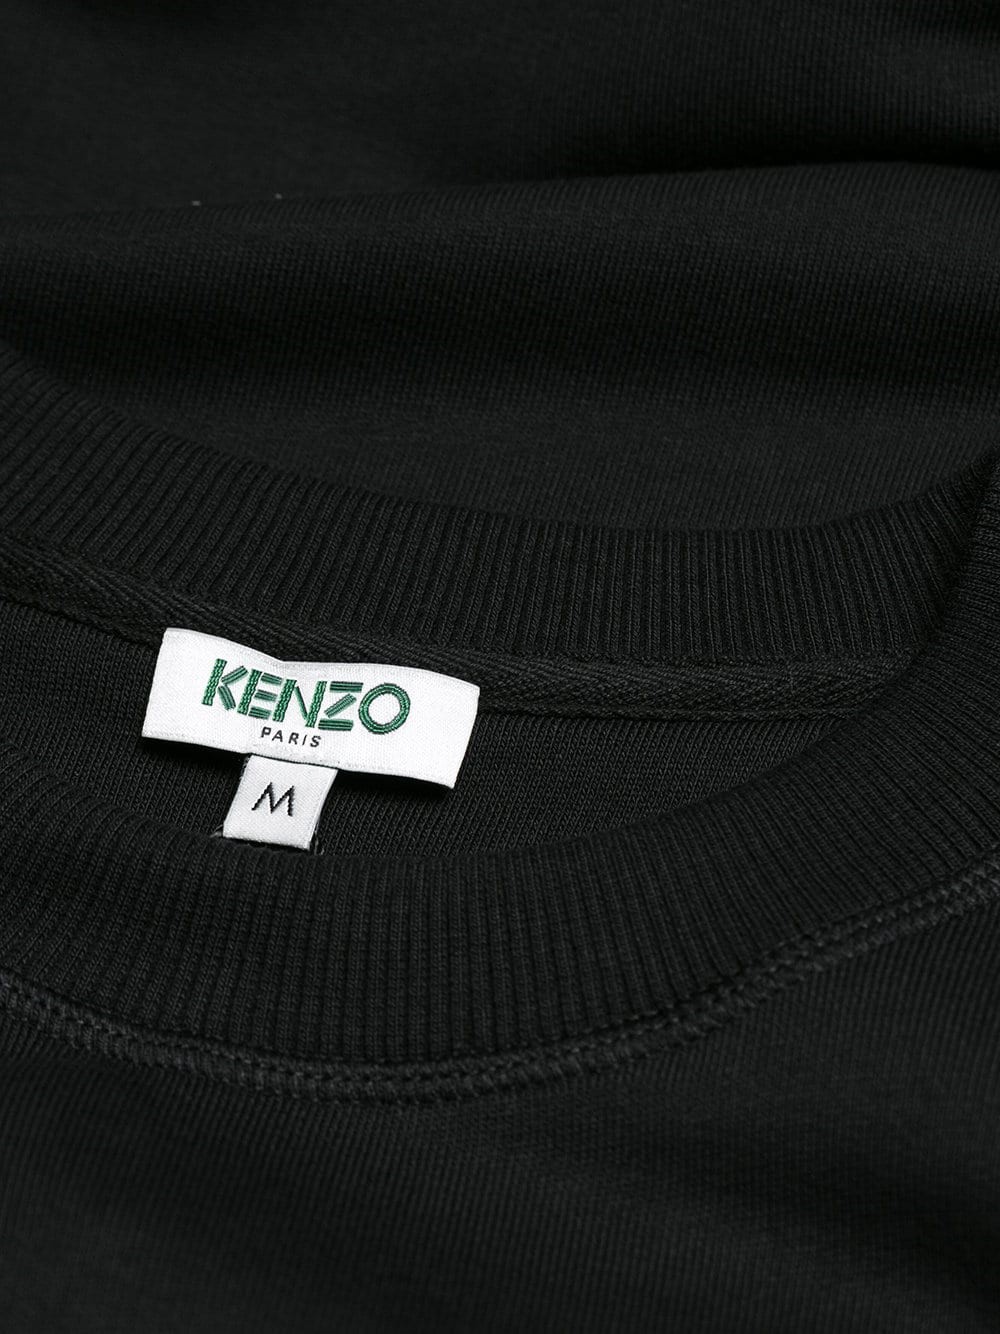 kenzo TIGER SWEATSHIRT available on montiboutique.com - 25566